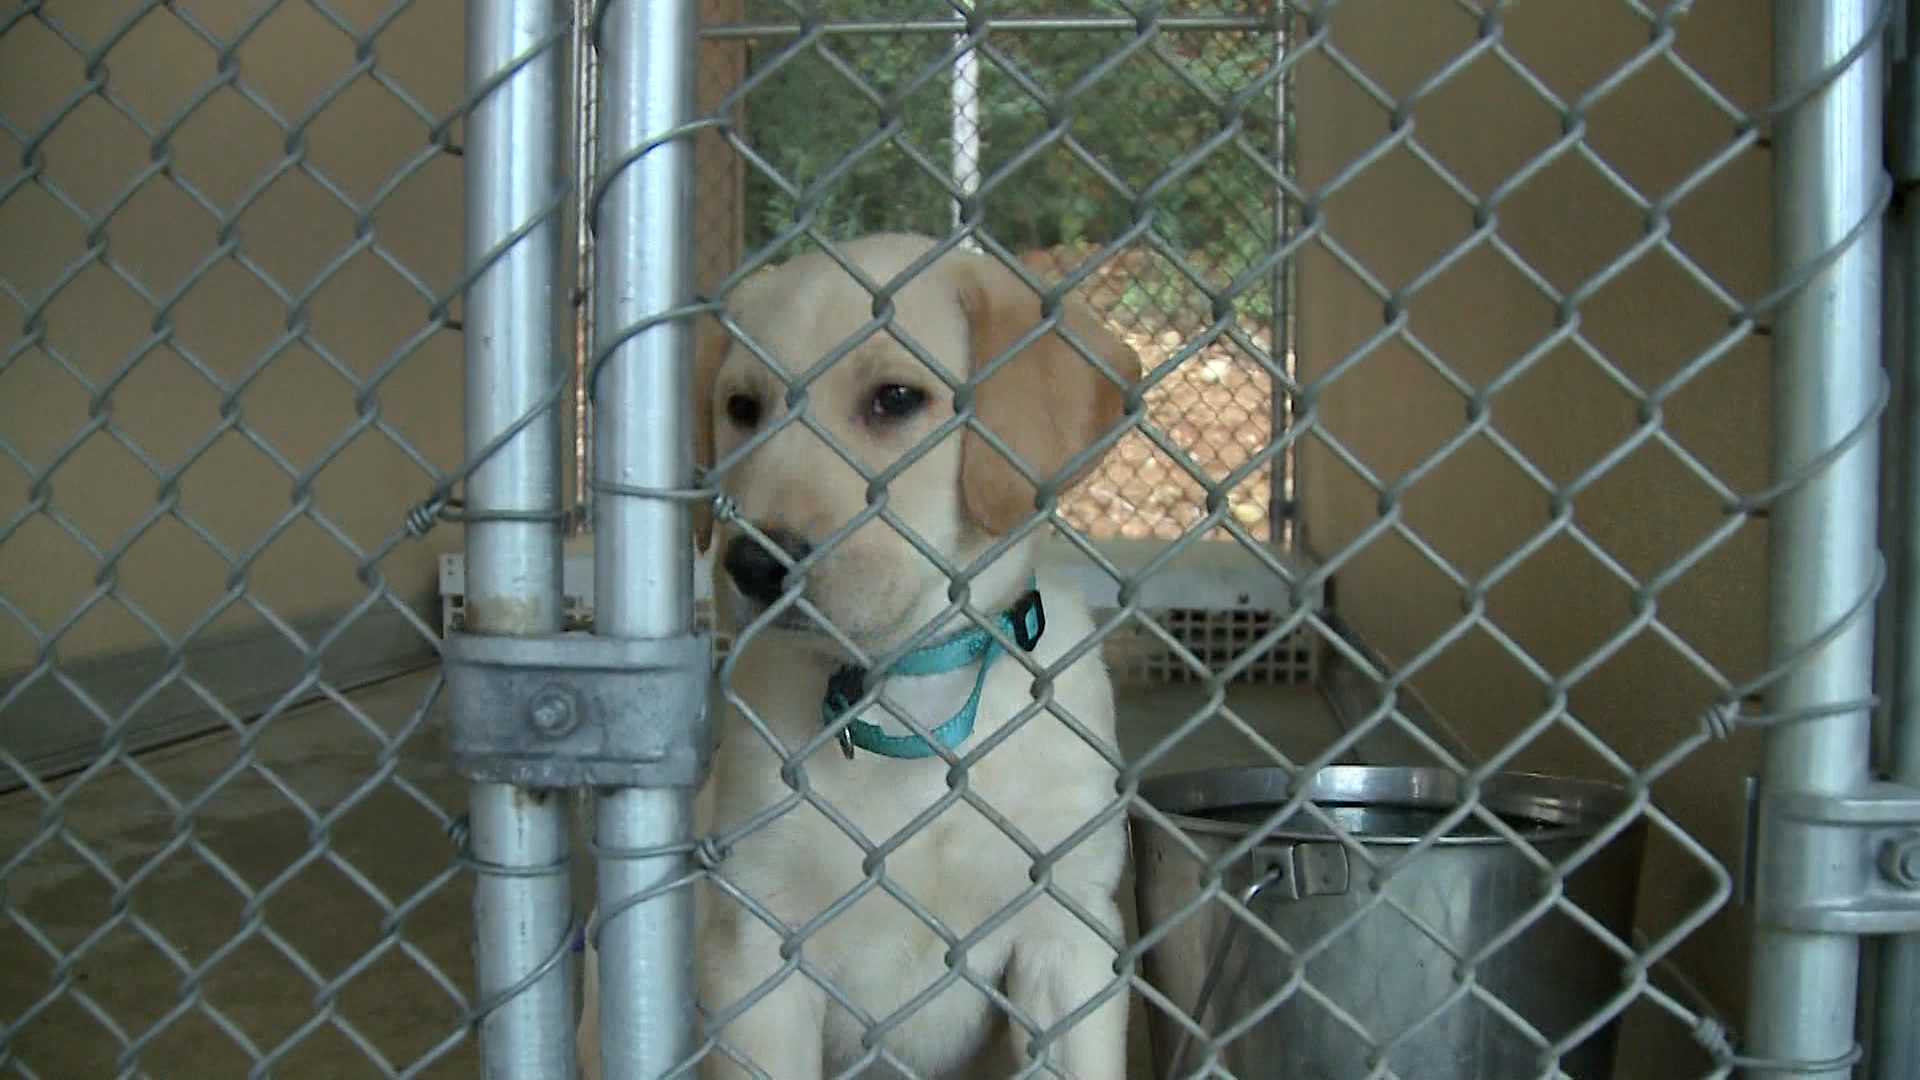 Treatment center uses therapy puppies to help addicts and trauma patients